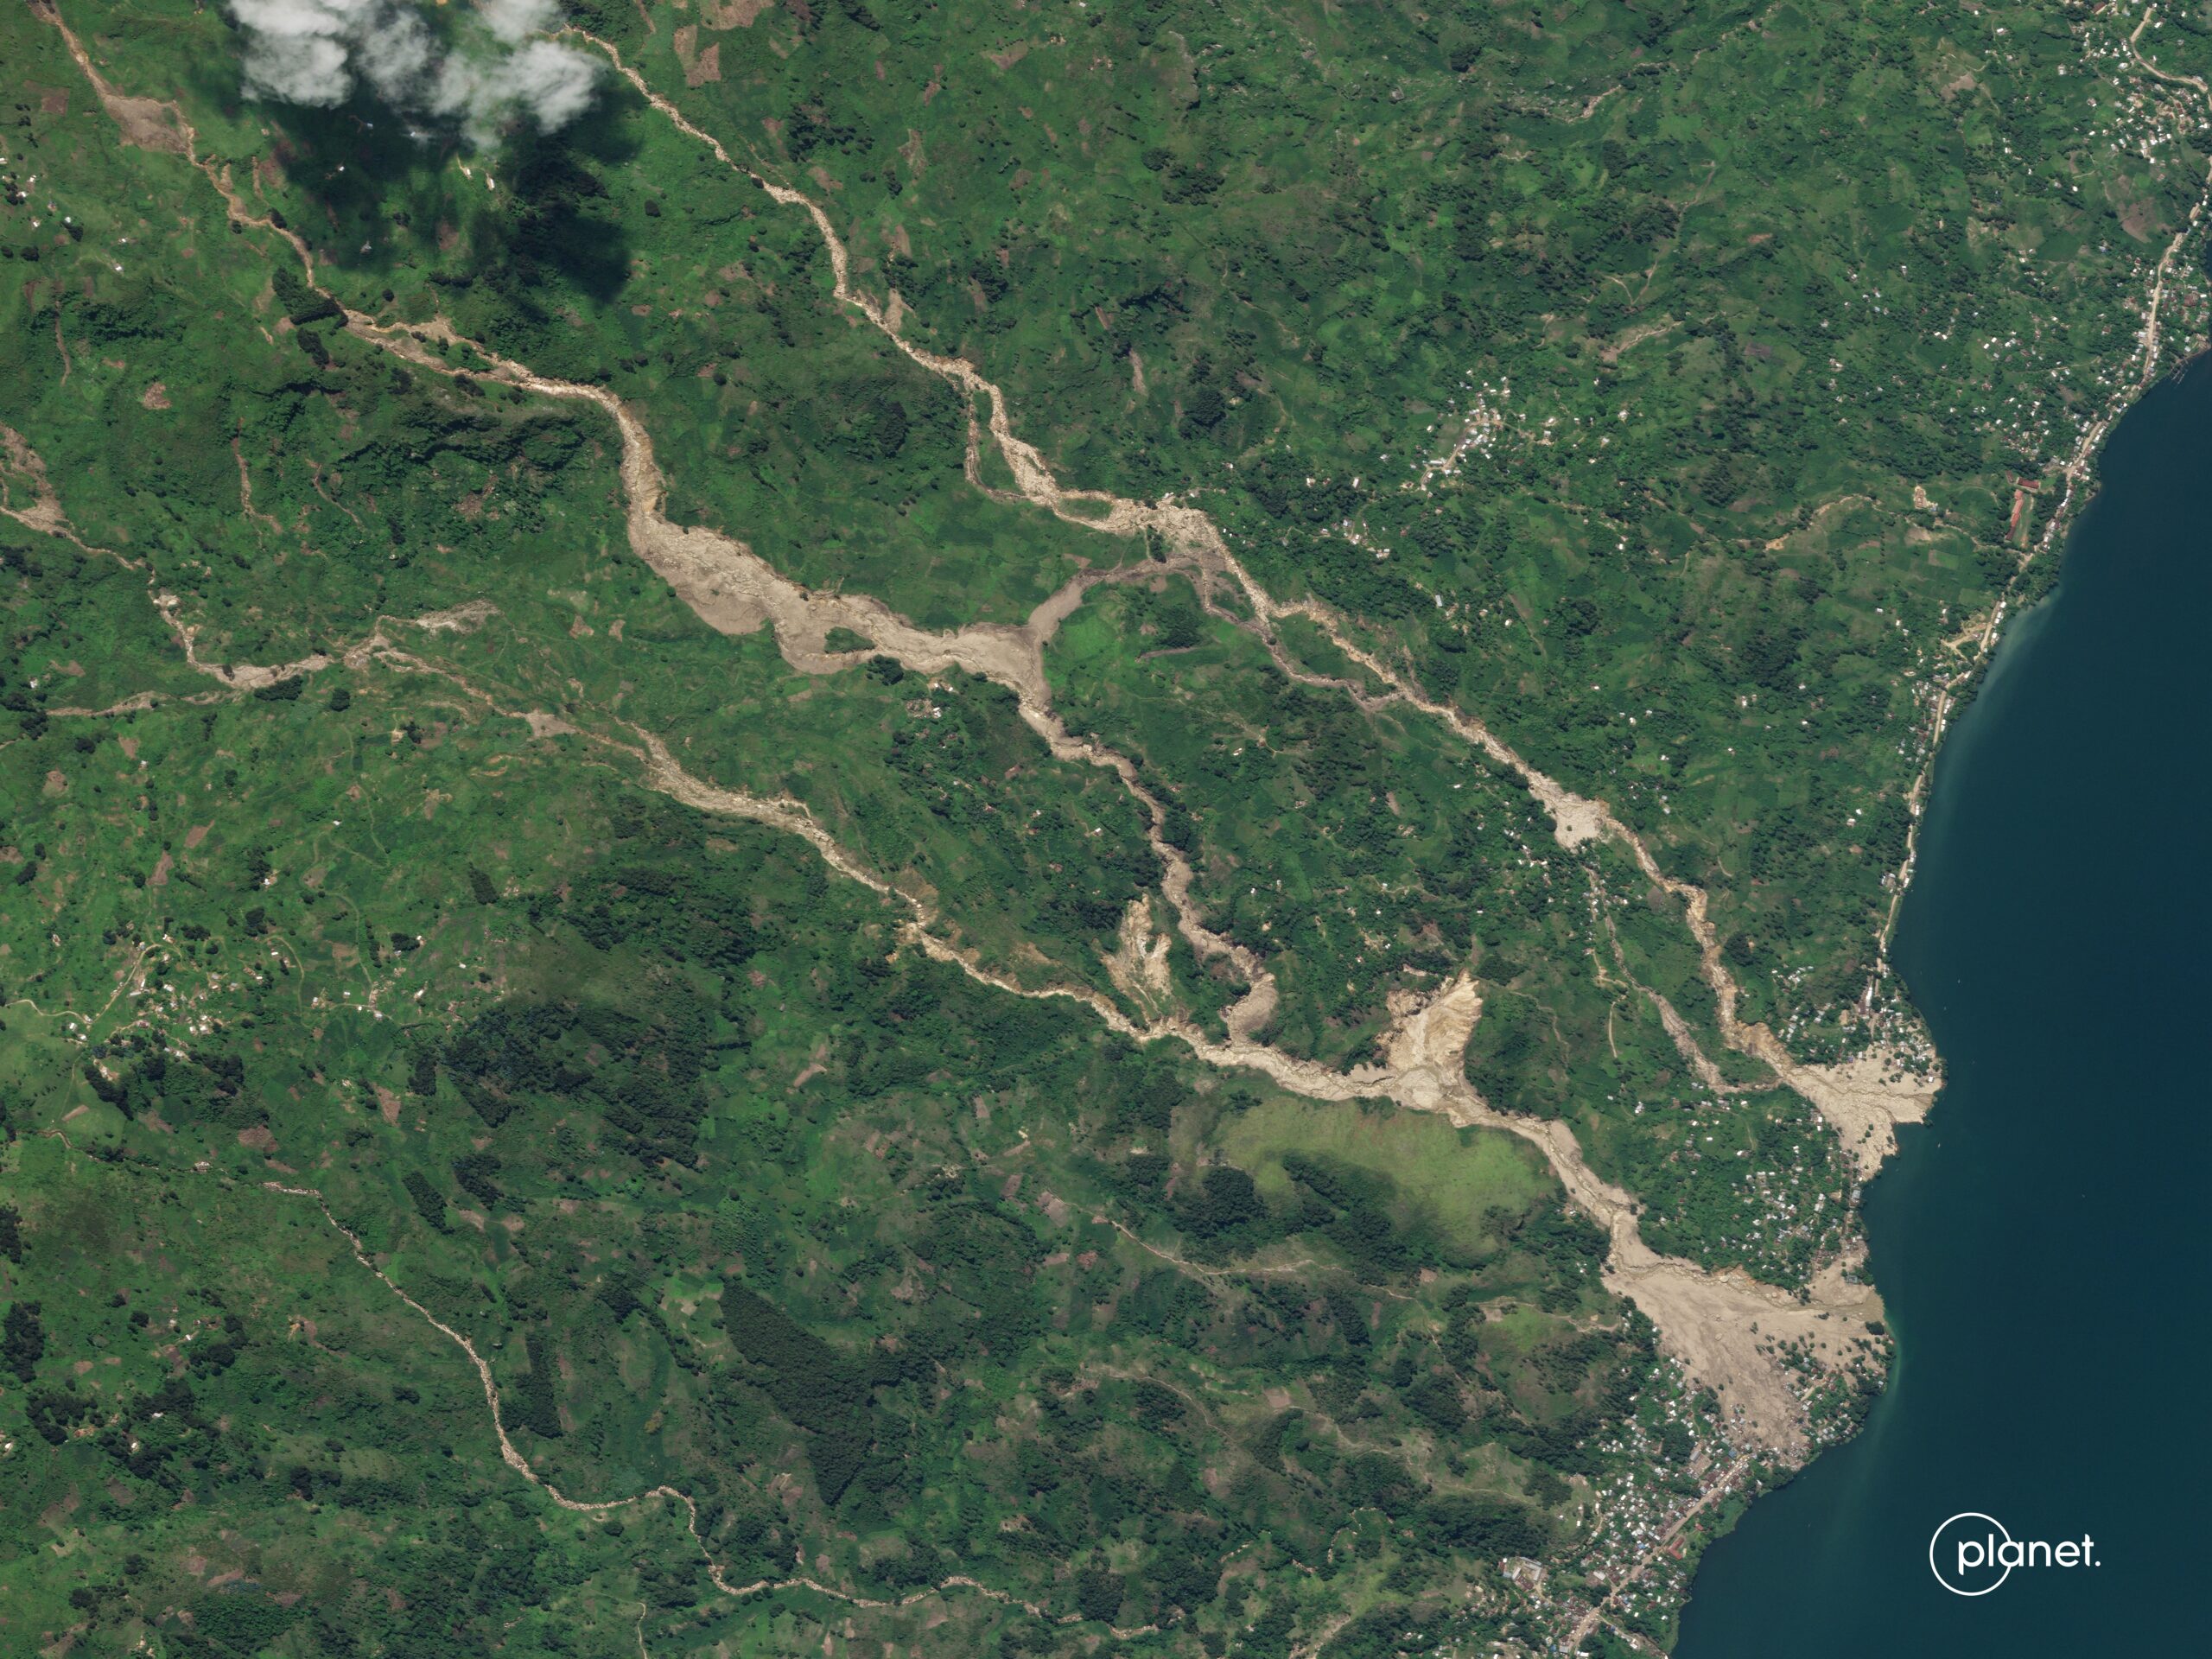 Planet SkySat image of the Lake Kivu landslides in the Democratic Republic of Congo.  This image shows the area upstream of Chabondo.  Image copyright Planet, used with permission. 